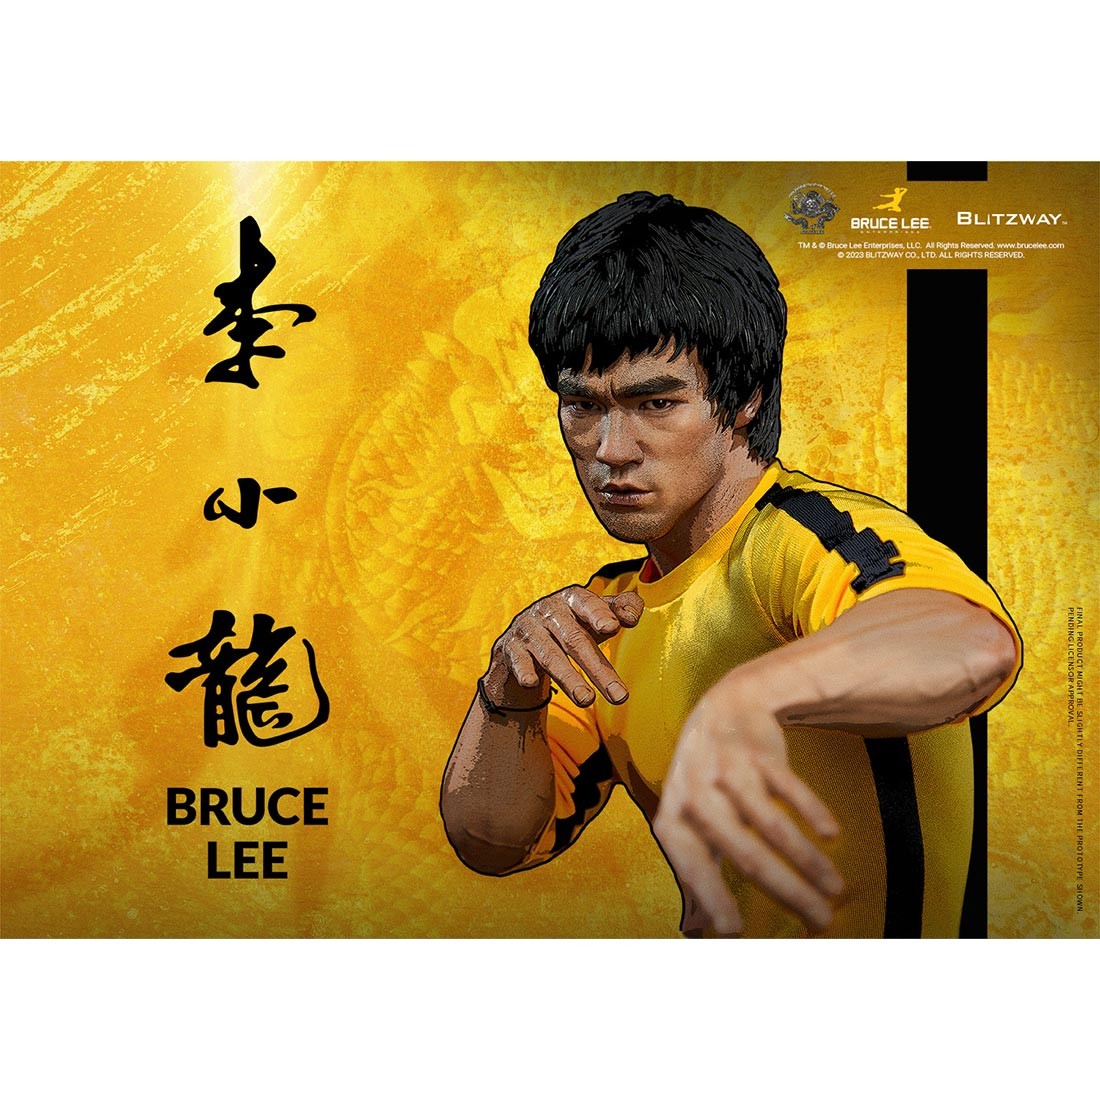 PREORDER - Blitzway Bruce Lee Tribute Statue 50th Anniversary Superb Scale 1/4 Statue Figure (yellow)